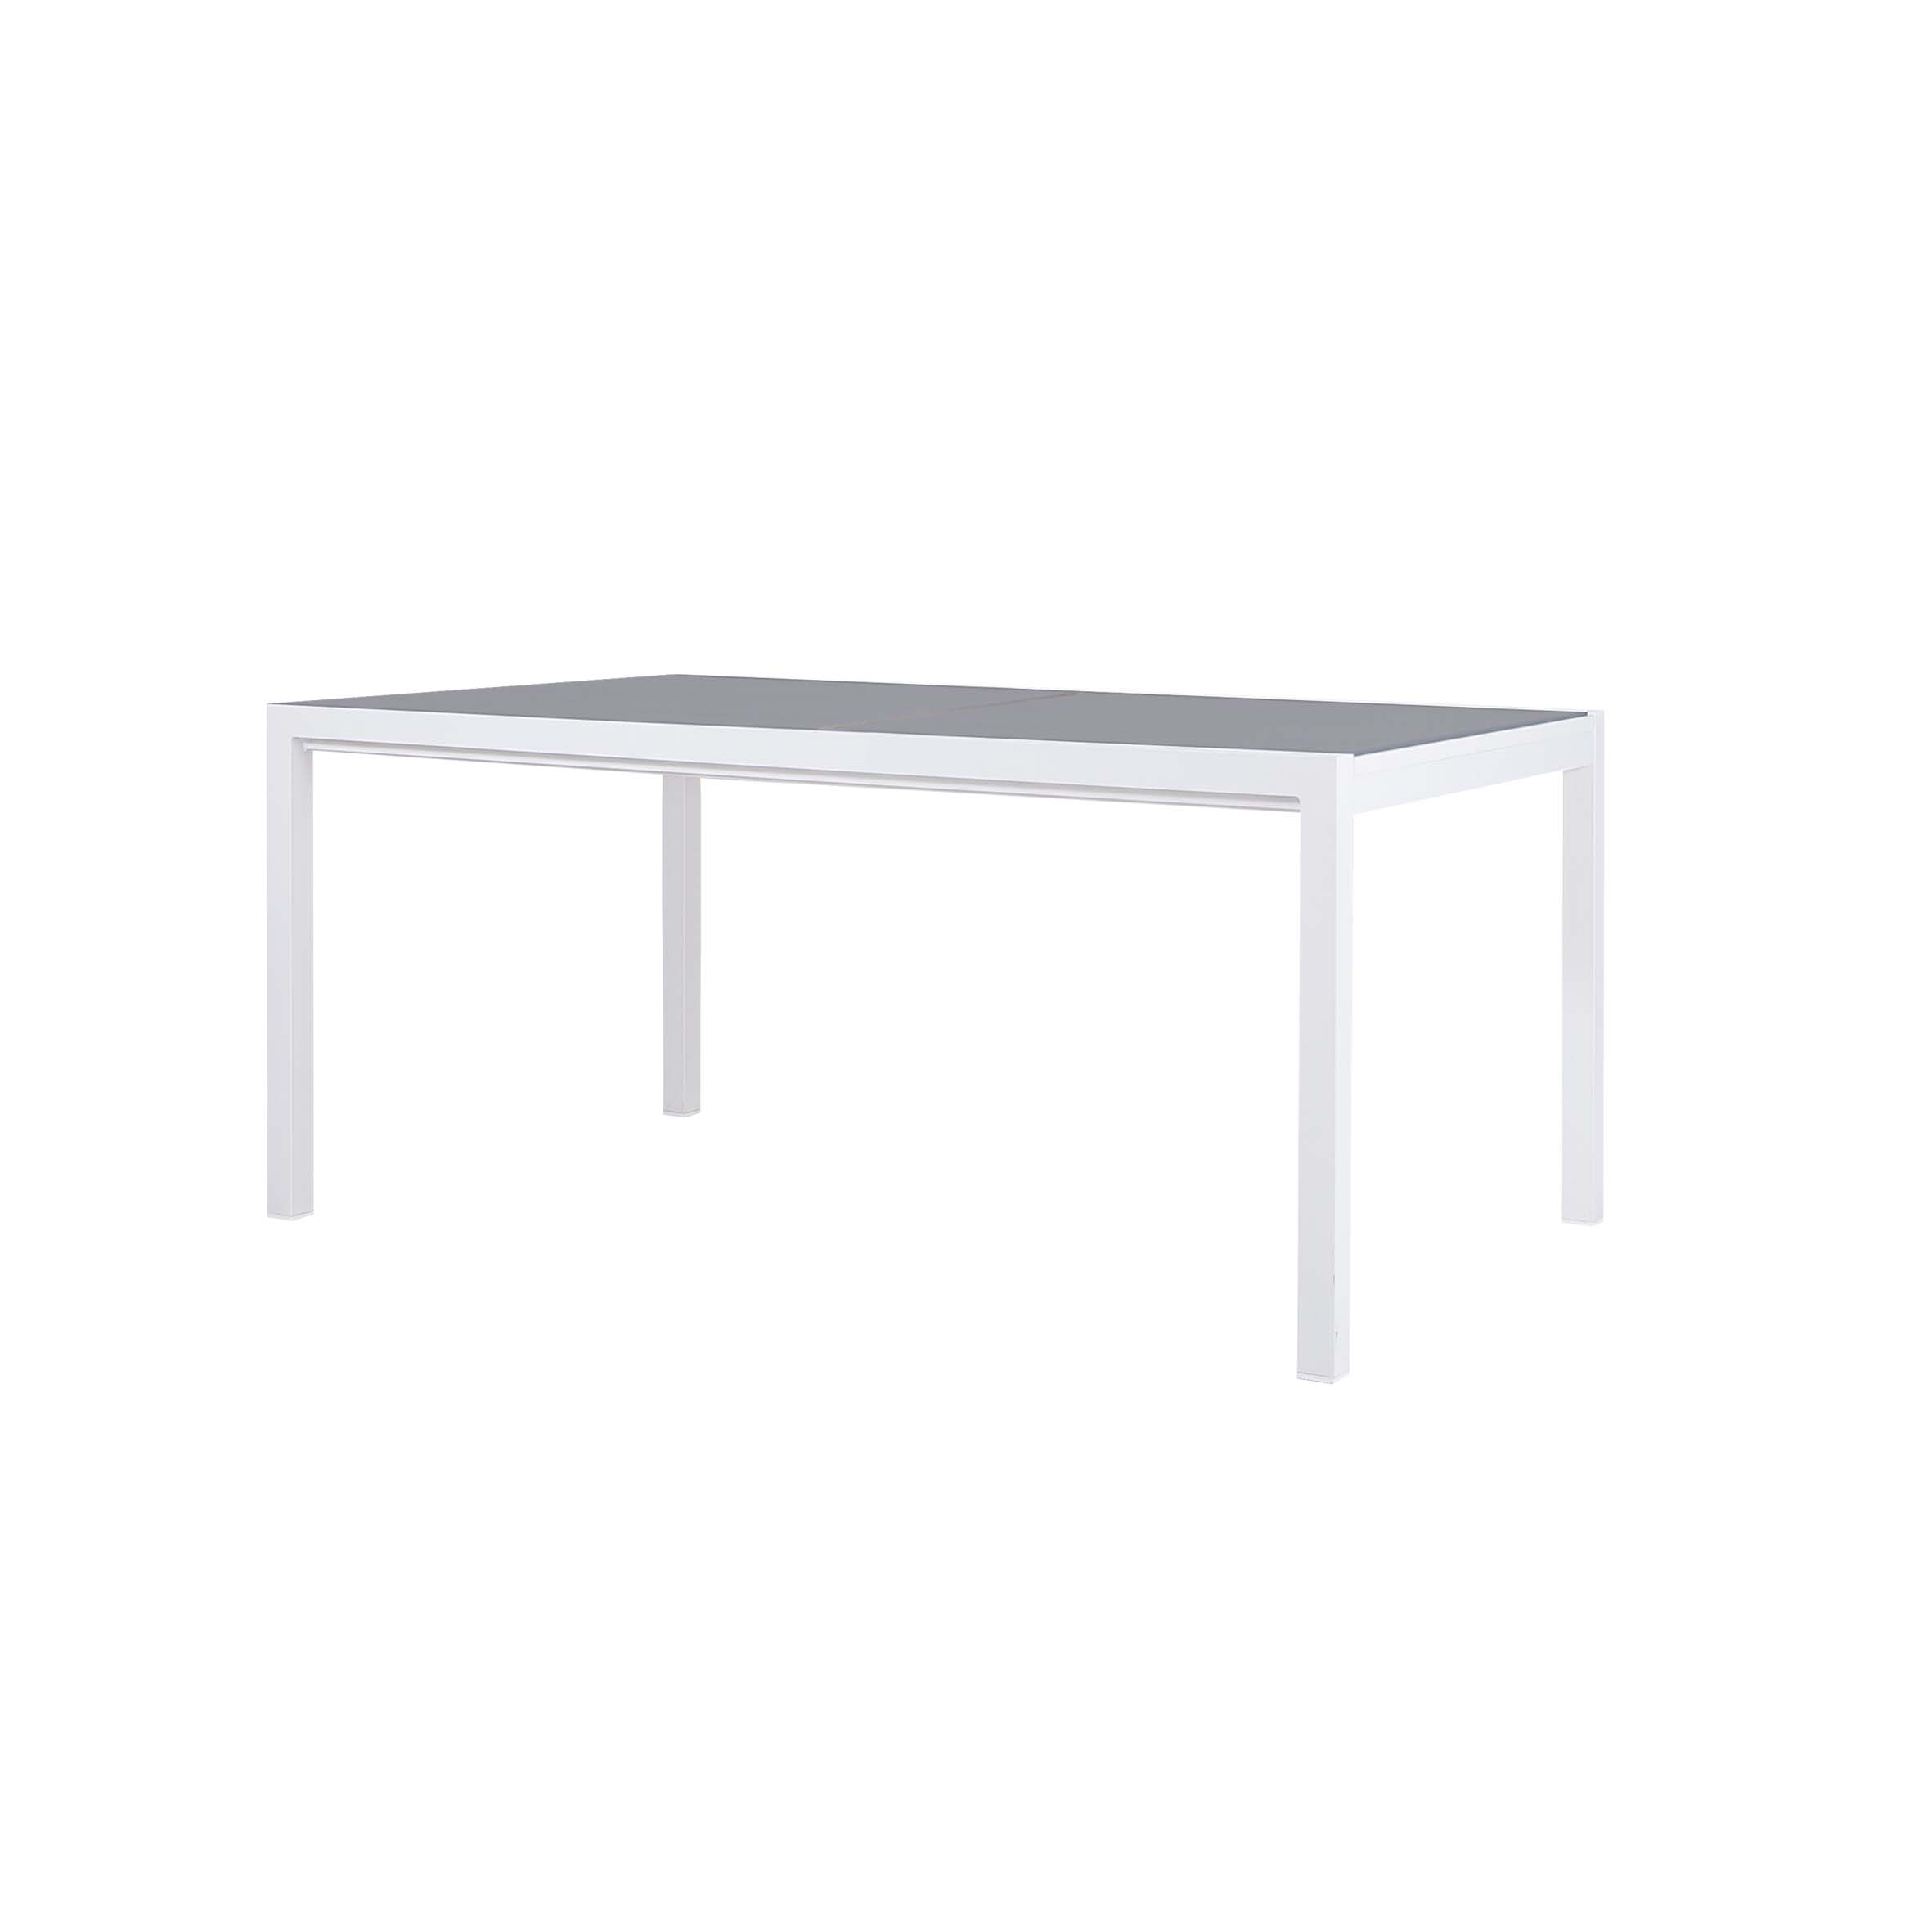 Kotka extension table S13